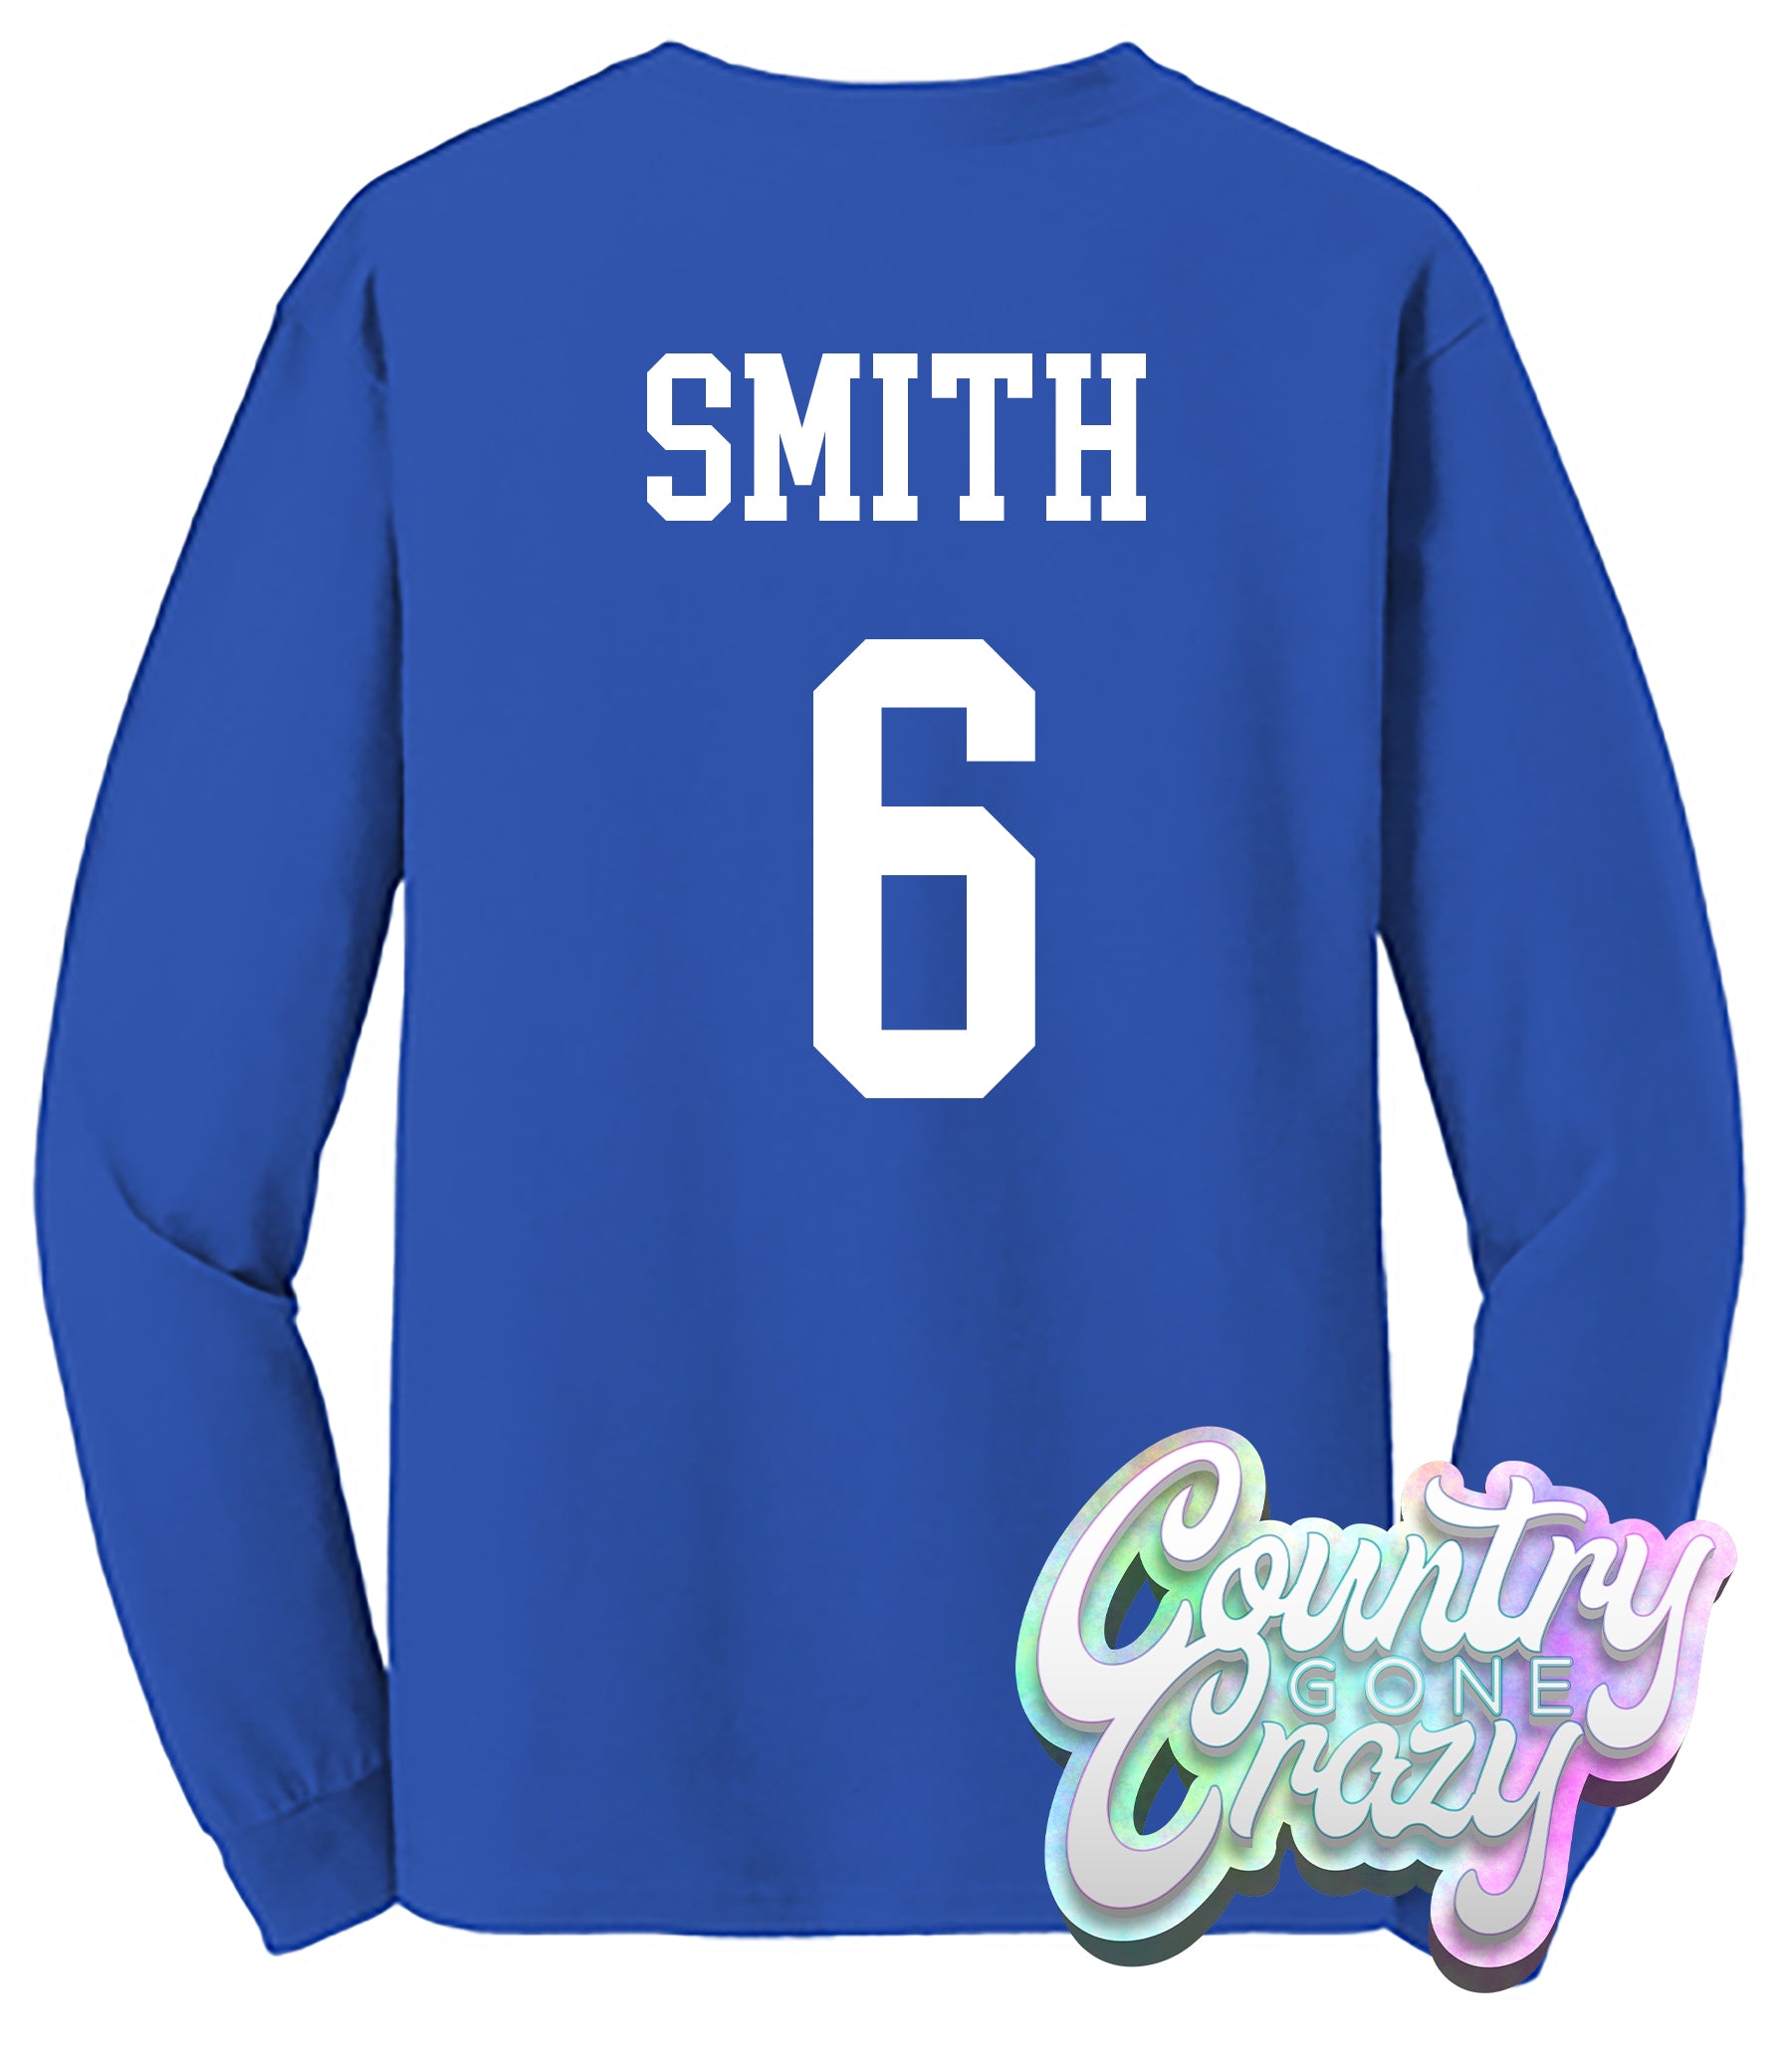 Los Angeles Dodgers Personalized Jerseys Customized Shirts with